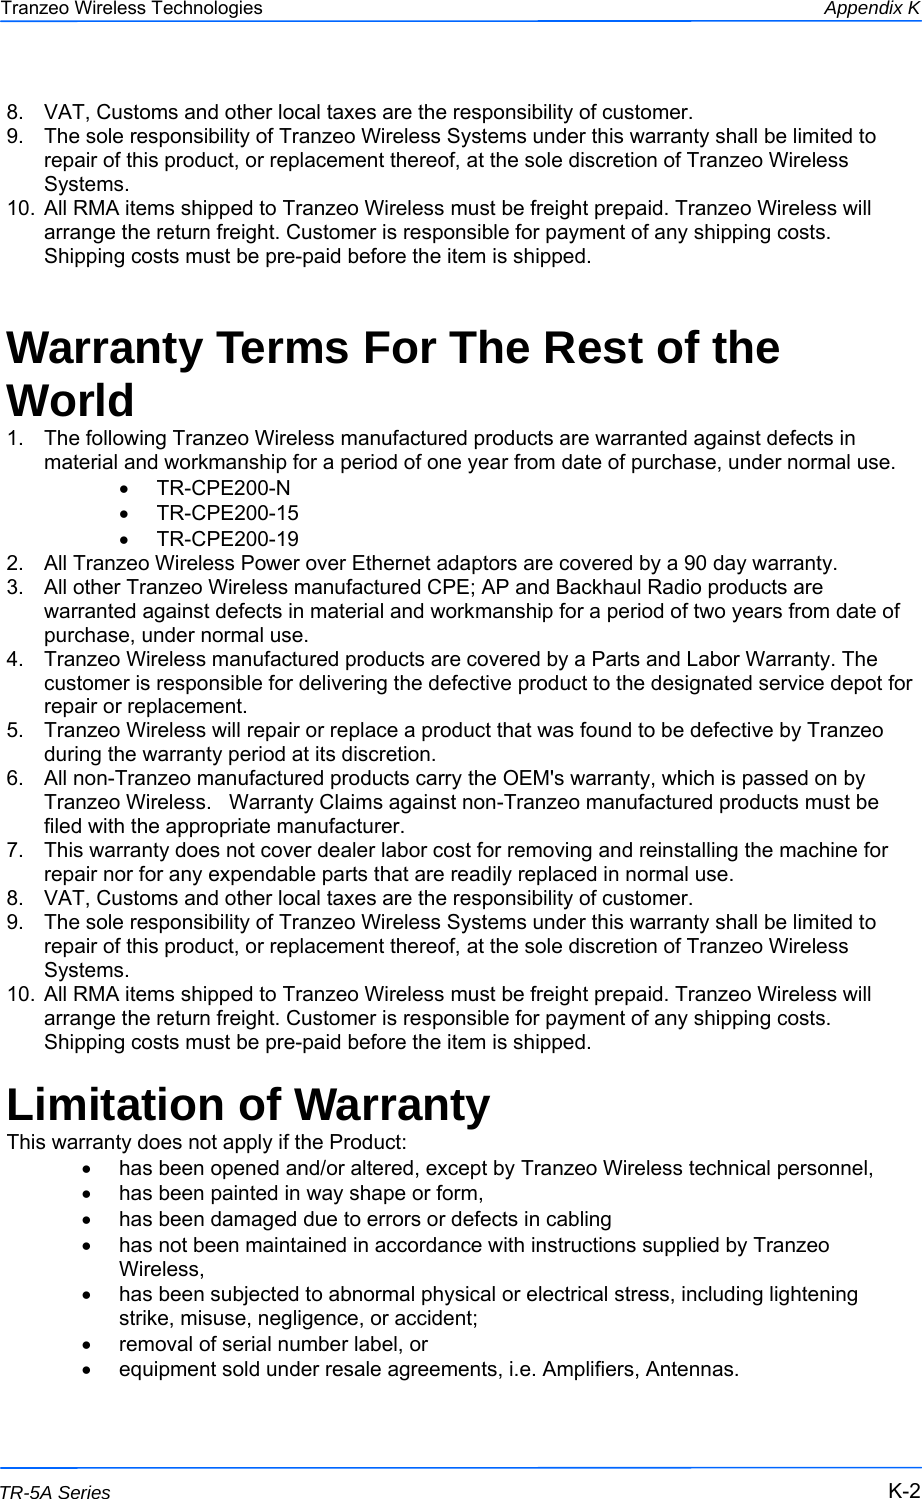  222 This document is intended for Public Distribution                         19473 Fraser Way, Pitt Meadows, B.C. Canada V3Y  2V4 Appendix K K-2 TR-5A Series Tranzeo Wireless Technologies 8.  VAT, Customs and other local taxes are the responsibility of customer. 9.  The sole responsibility of Tranzeo Wireless Systems under this warranty shall be limited to repair of this product, or replacement thereof, at the sole discretion of Tranzeo Wireless Systems. 10.  All RMA items shipped to Tranzeo Wireless must be freight prepaid. Tranzeo Wireless will arrange the return freight. Customer is responsible for payment of any shipping costs. Shipping costs must be pre-paid before the item is shipped.  Warranty Terms For The Rest of the World 1.  The following Tranzeo Wireless manufactured products are warranted against defects in material and workmanship for a period of one year from date of purchase, under normal use. •  TR-CPE200-N •  TR-CPE200-15 •  TR-CPE200-19 2.  All Tranzeo Wireless Power over Ethernet adaptors are covered by a 90 day warranty. 3.  All other Tranzeo Wireless manufactured CPE; AP and Backhaul Radio products are warranted against defects in material and workmanship for a period of two years from date of purchase, under normal use. 4.  Tranzeo Wireless manufactured products are covered by a Parts and Labor Warranty. The customer is responsible for delivering the defective product to the designated service depot for repair or replacement. 5.  Tranzeo Wireless will repair or replace a product that was found to be defective by Tranzeo during the warranty period at its discretion. 6.  All non-Tranzeo manufactured products carry the OEM&apos;s warranty, which is passed on by Tranzeo Wireless.   Warranty Claims against non-Tranzeo manufactured products must be filed with the appropriate manufacturer. 7.  This warranty does not cover dealer labor cost for removing and reinstalling the machine for repair nor for any expendable parts that are readily replaced in normal use. 8.  VAT, Customs and other local taxes are the responsibility of customer. 9.  The sole responsibility of Tranzeo Wireless Systems under this warranty shall be limited to repair of this product, or replacement thereof, at the sole discretion of Tranzeo Wireless Systems. 10.  All RMA items shipped to Tranzeo Wireless must be freight prepaid. Tranzeo Wireless will arrange the return freight. Customer is responsible for payment of any shipping costs. Shipping costs must be pre-paid before the item is shipped.  Limitation of Warranty This warranty does not apply if the Product: •  has been opened and/or altered, except by Tranzeo Wireless technical personnel, •  has been painted in way shape or form, •  has been damaged due to errors or defects in cabling •  has not been maintained in accordance with instructions supplied by Tranzeo Wireless, •  has been subjected to abnormal physical or electrical stress, including lightening strike, misuse, negligence, or accident; •  removal of serial number label, or •  equipment sold under resale agreements, i.e. Amplifiers, Antennas.  